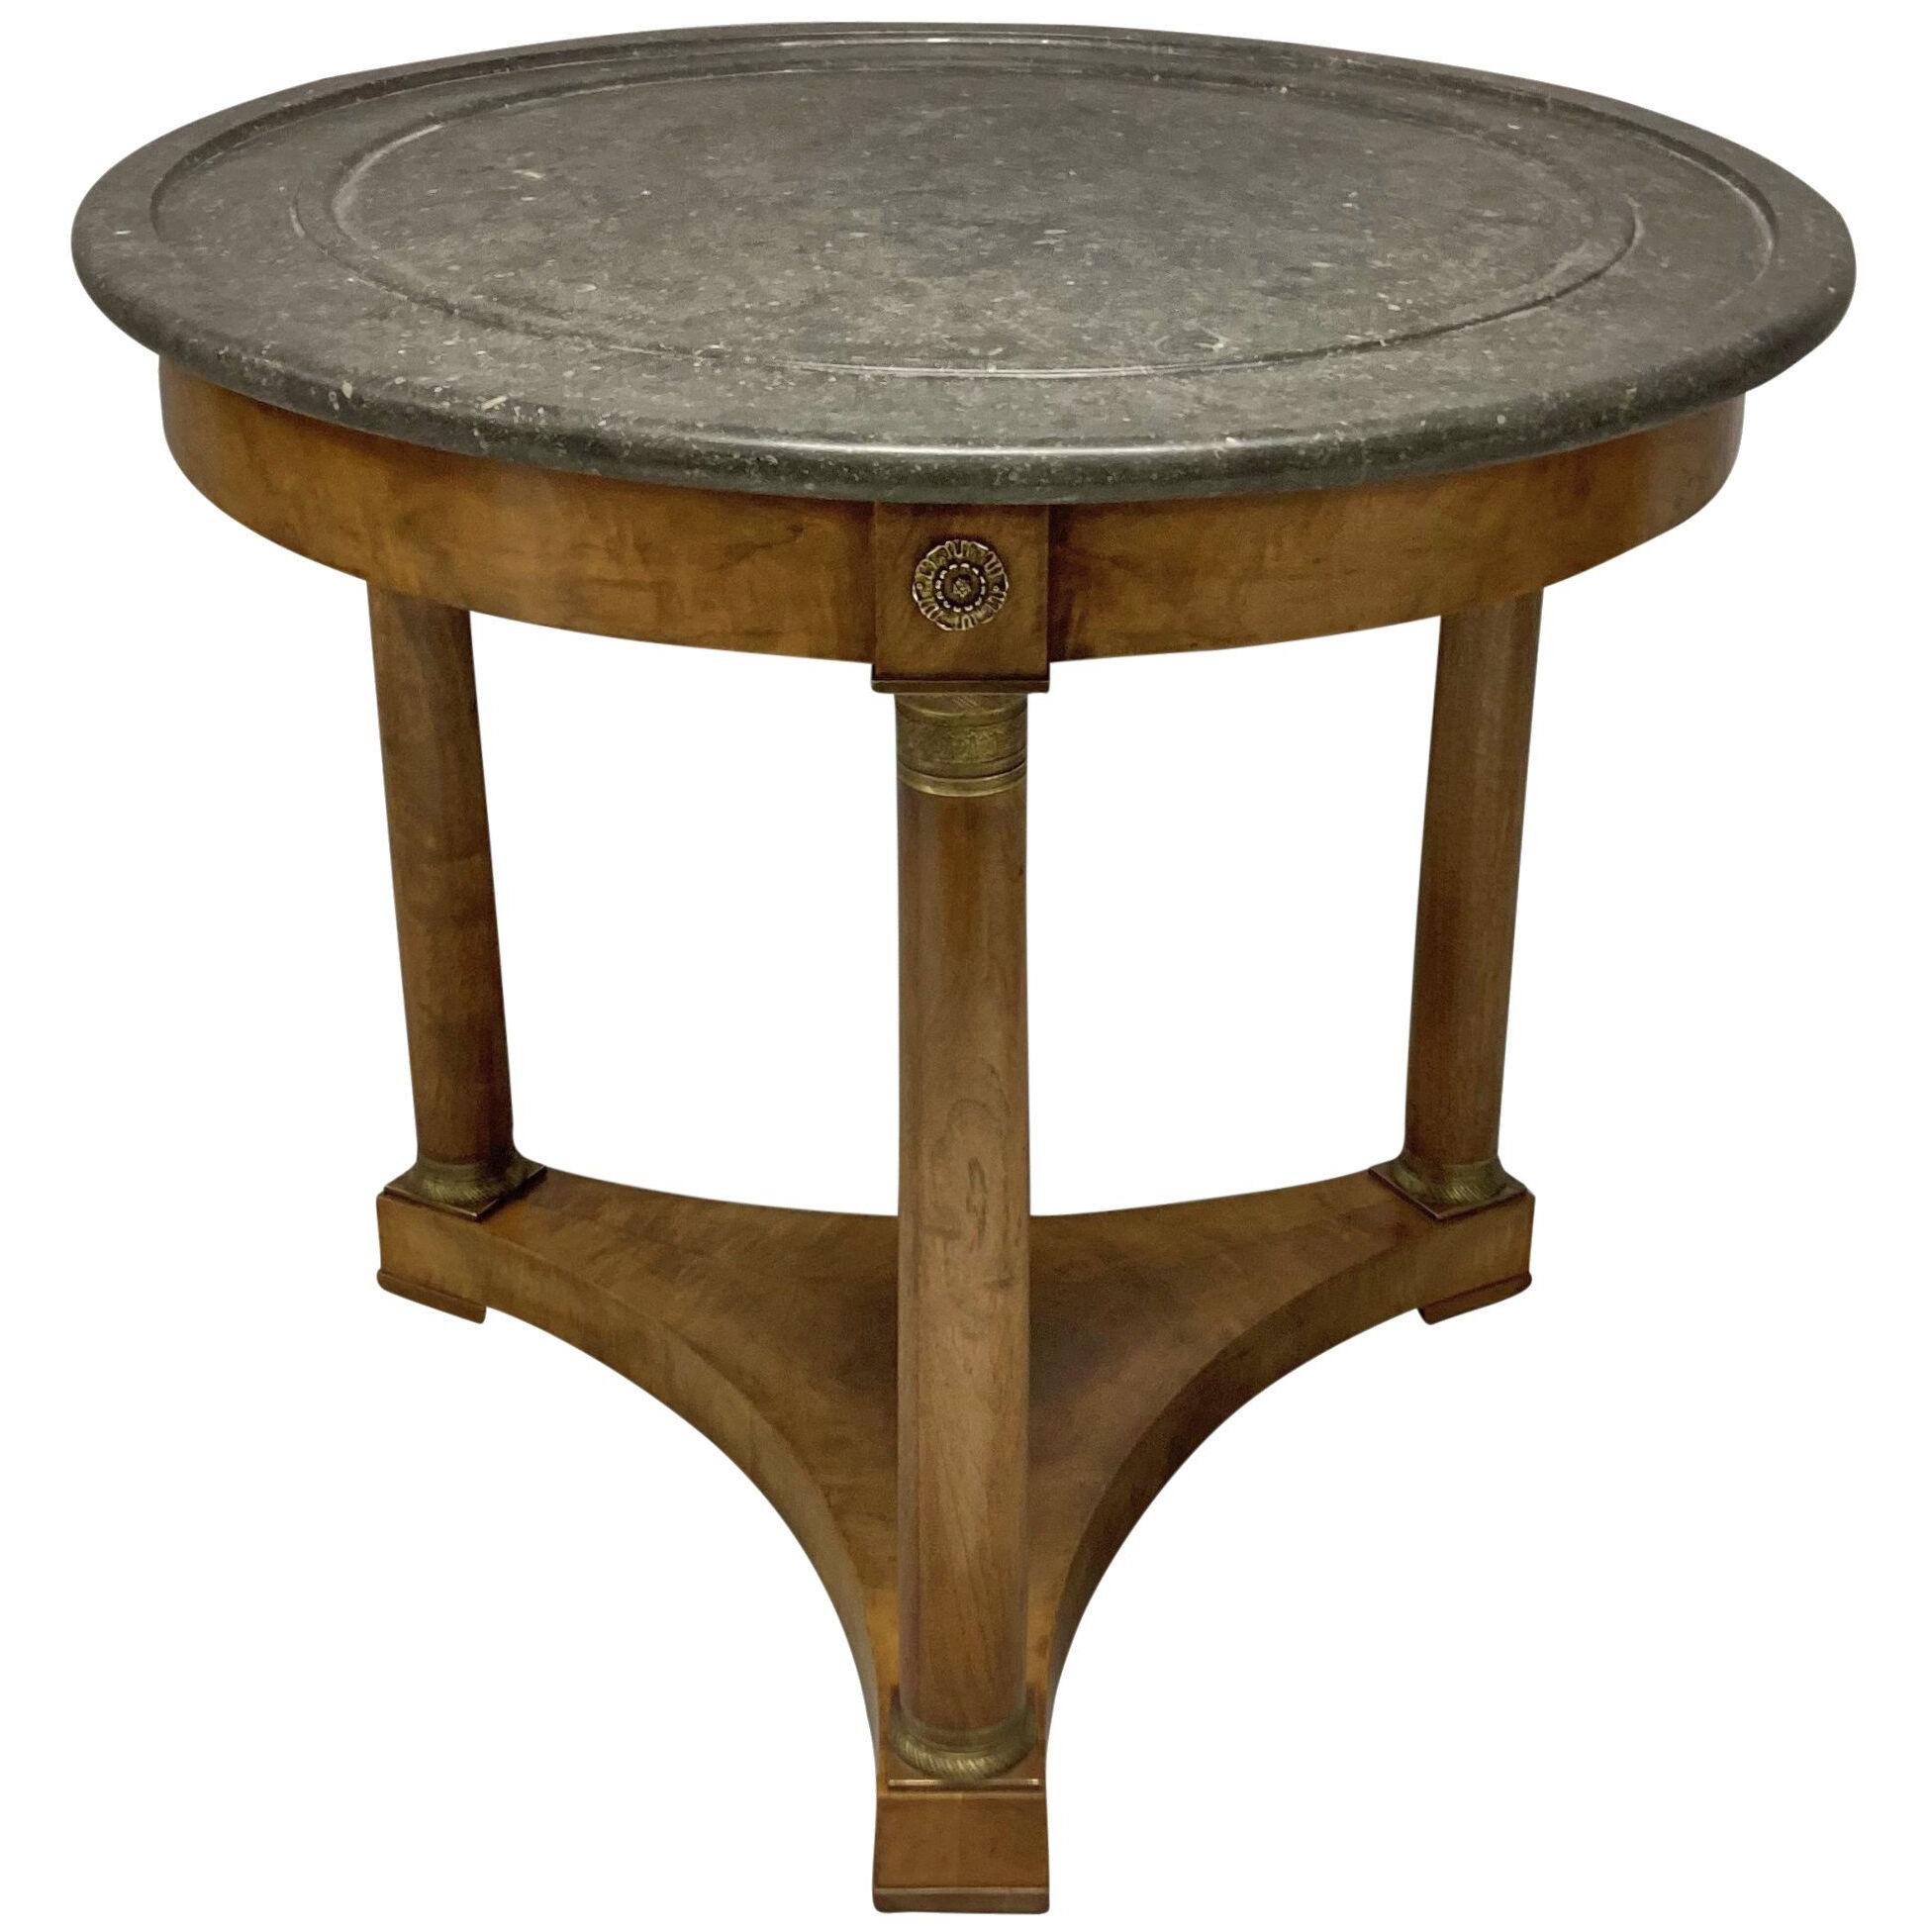 A FRENCH EMPIRE STYLE GUERIDON TABLE